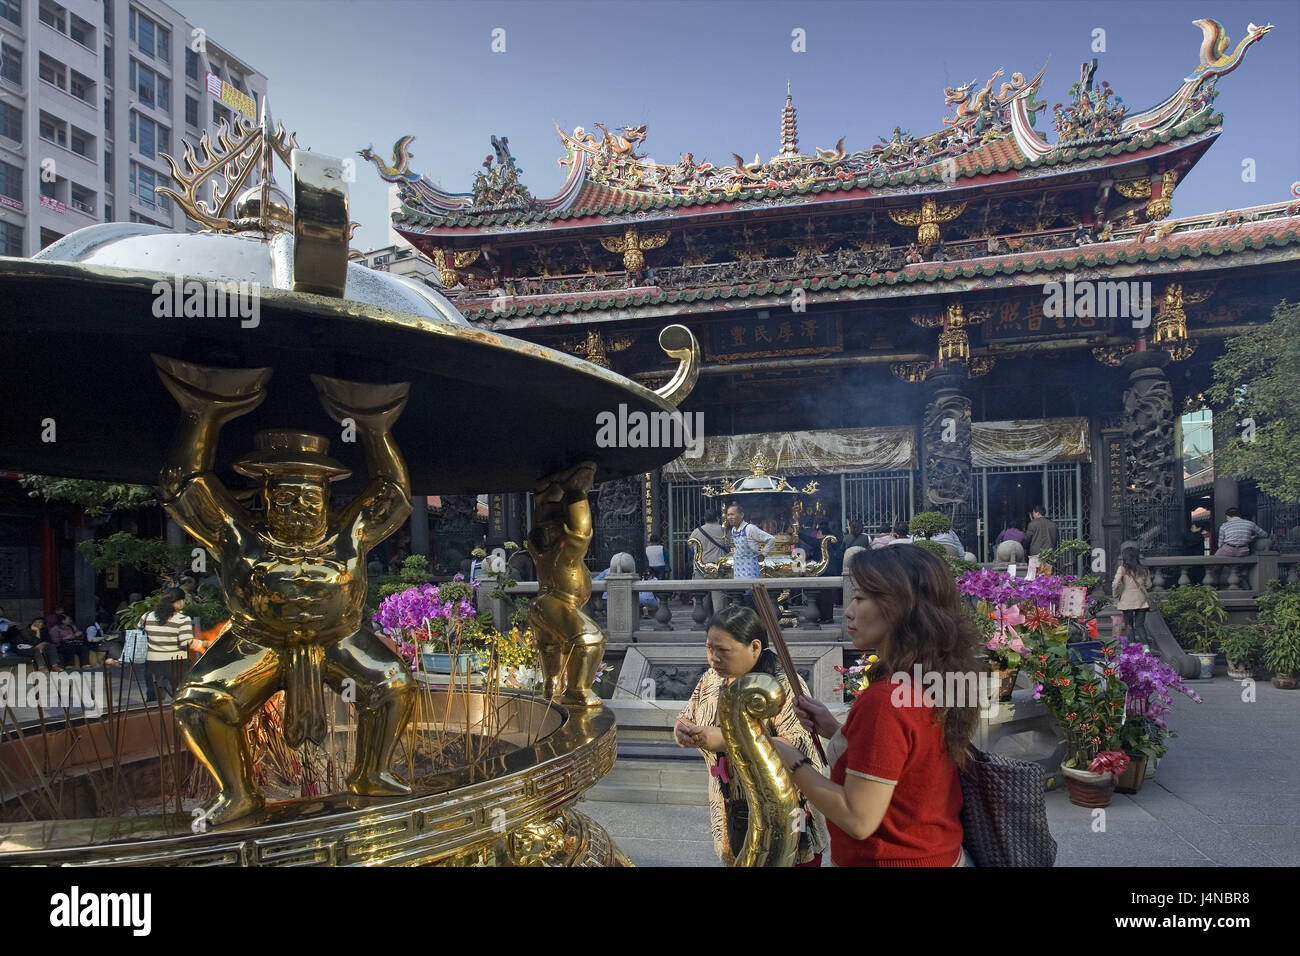 Taiwan, Taipeh, Longshan temple, believers, no model release, Asia, Eastern Asia, town, capital, building, temple building, architecture, joss stick, faith, religion, Buddhism, person, outside, Stock Photo